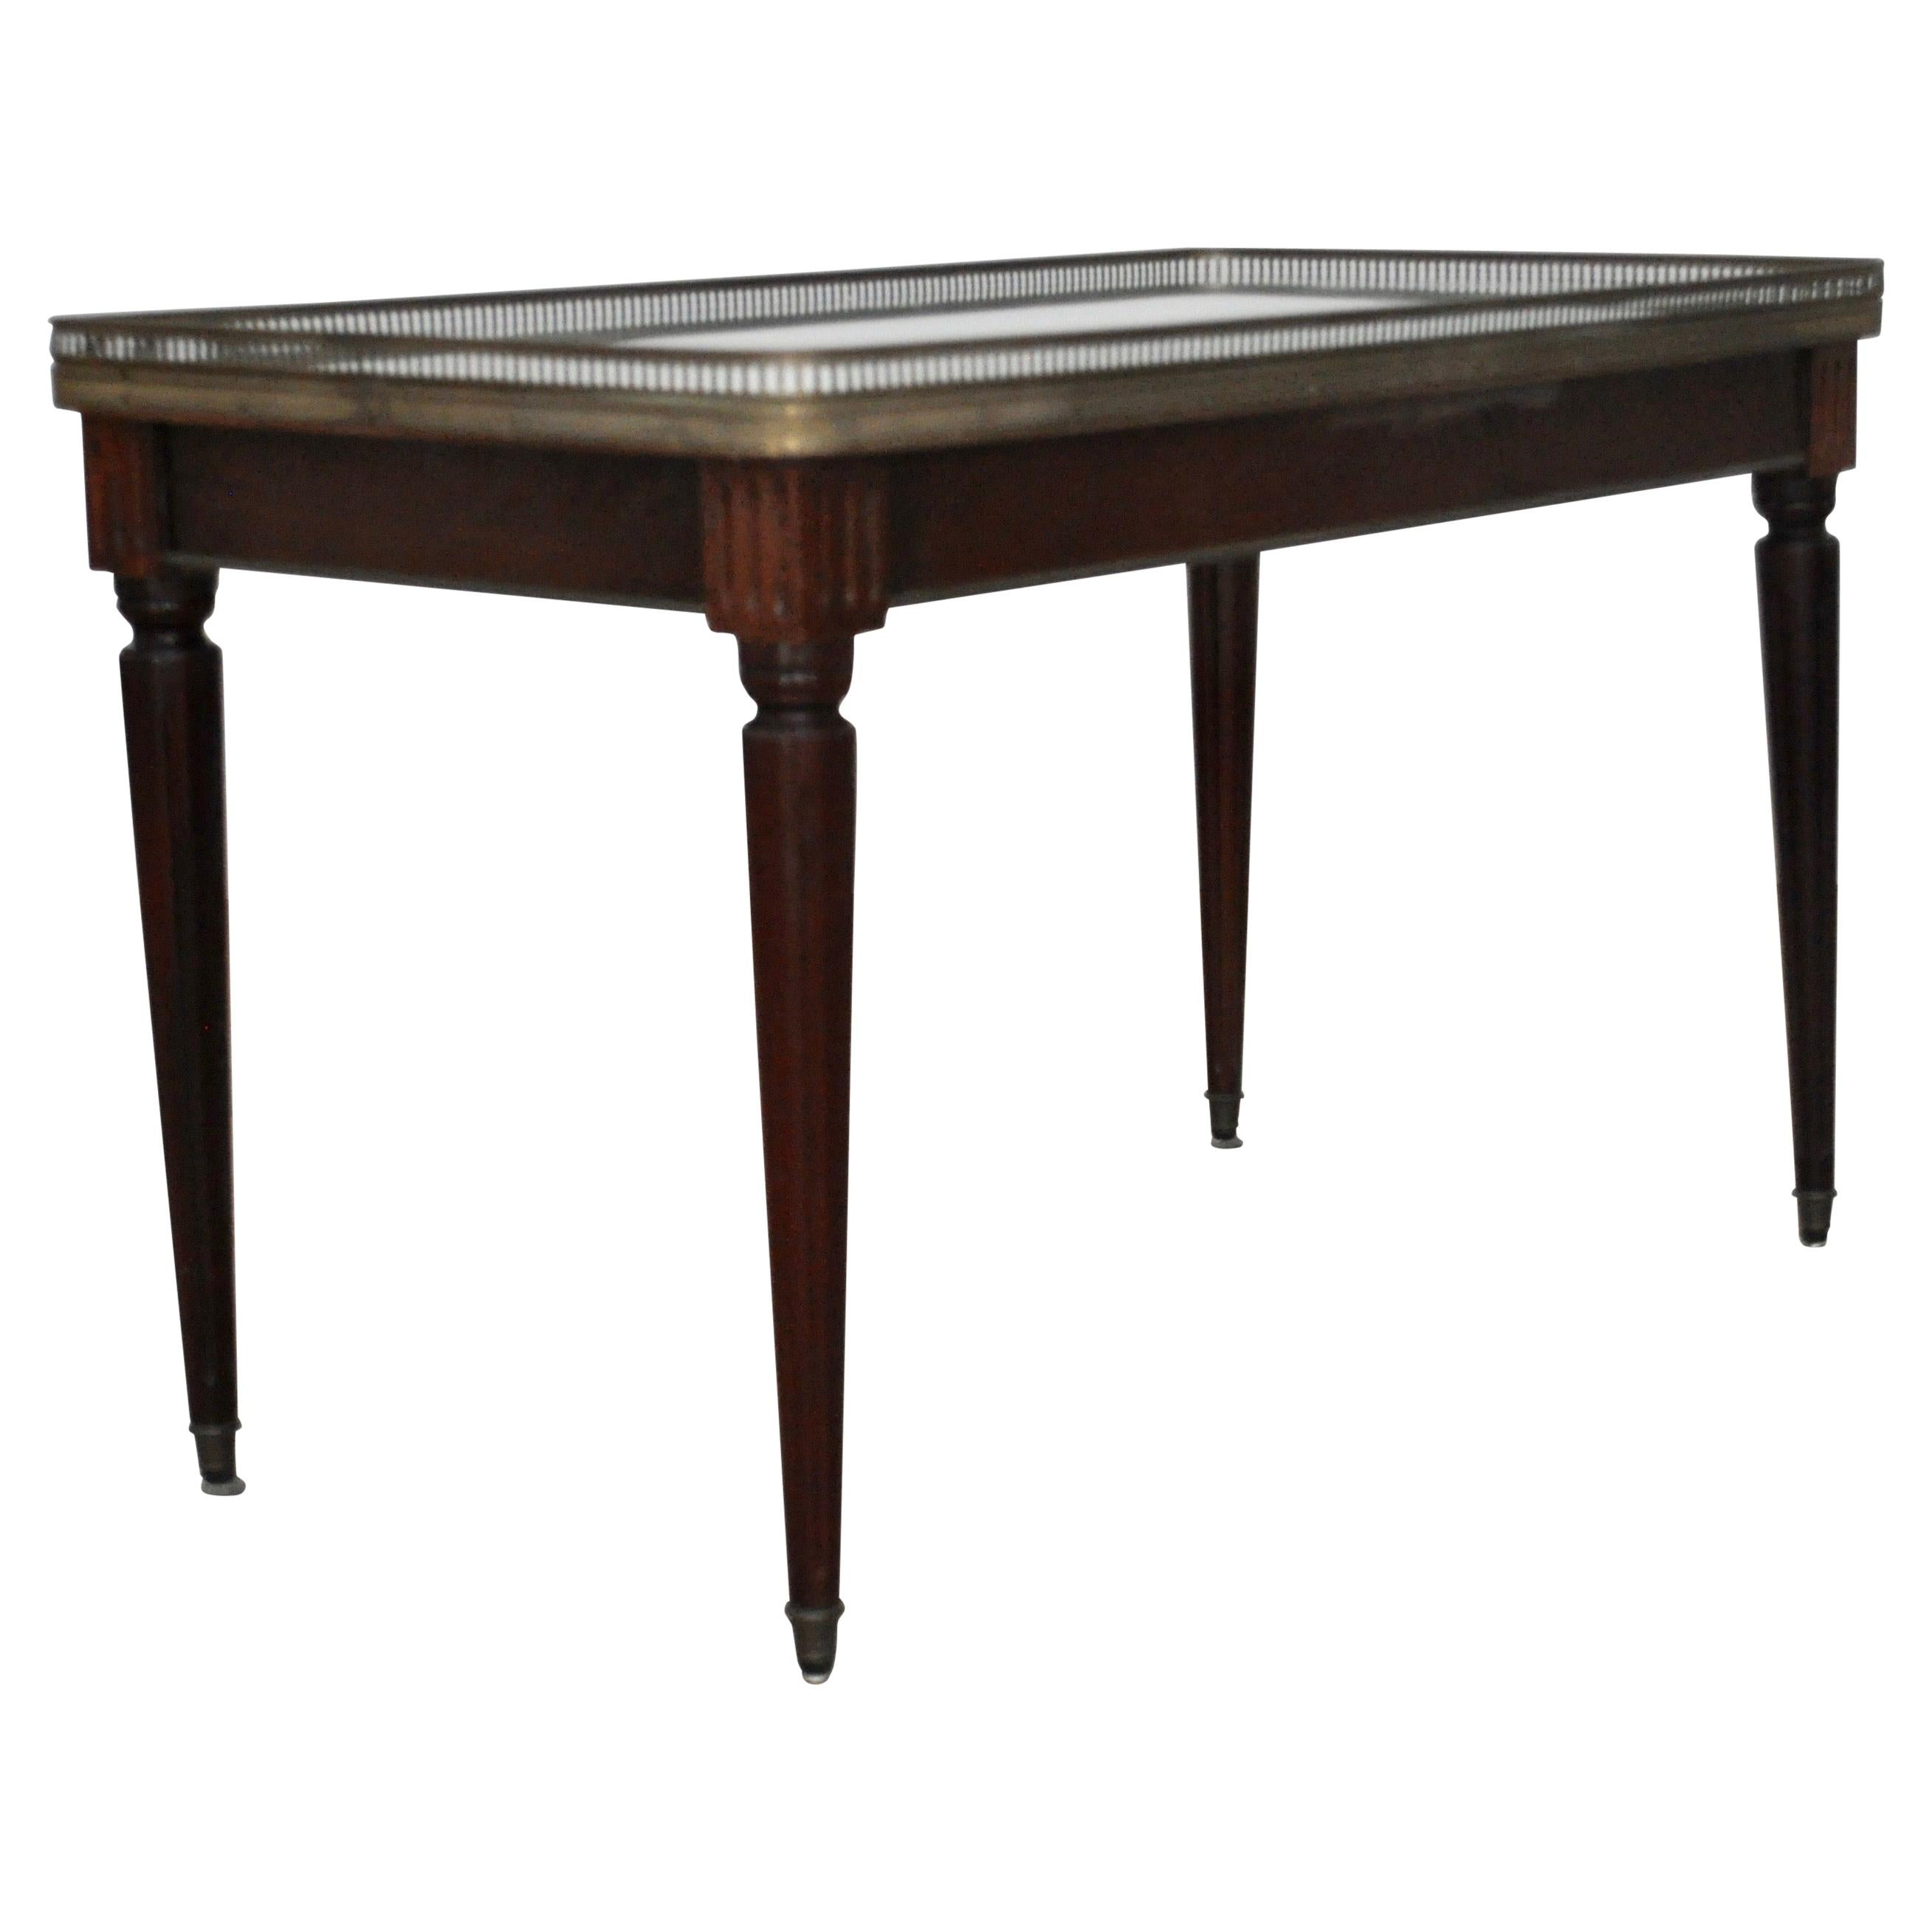 Coffee Table in Carrara Marble, Brass Part, Mahogany Wood, Italy, 1900s For Sale